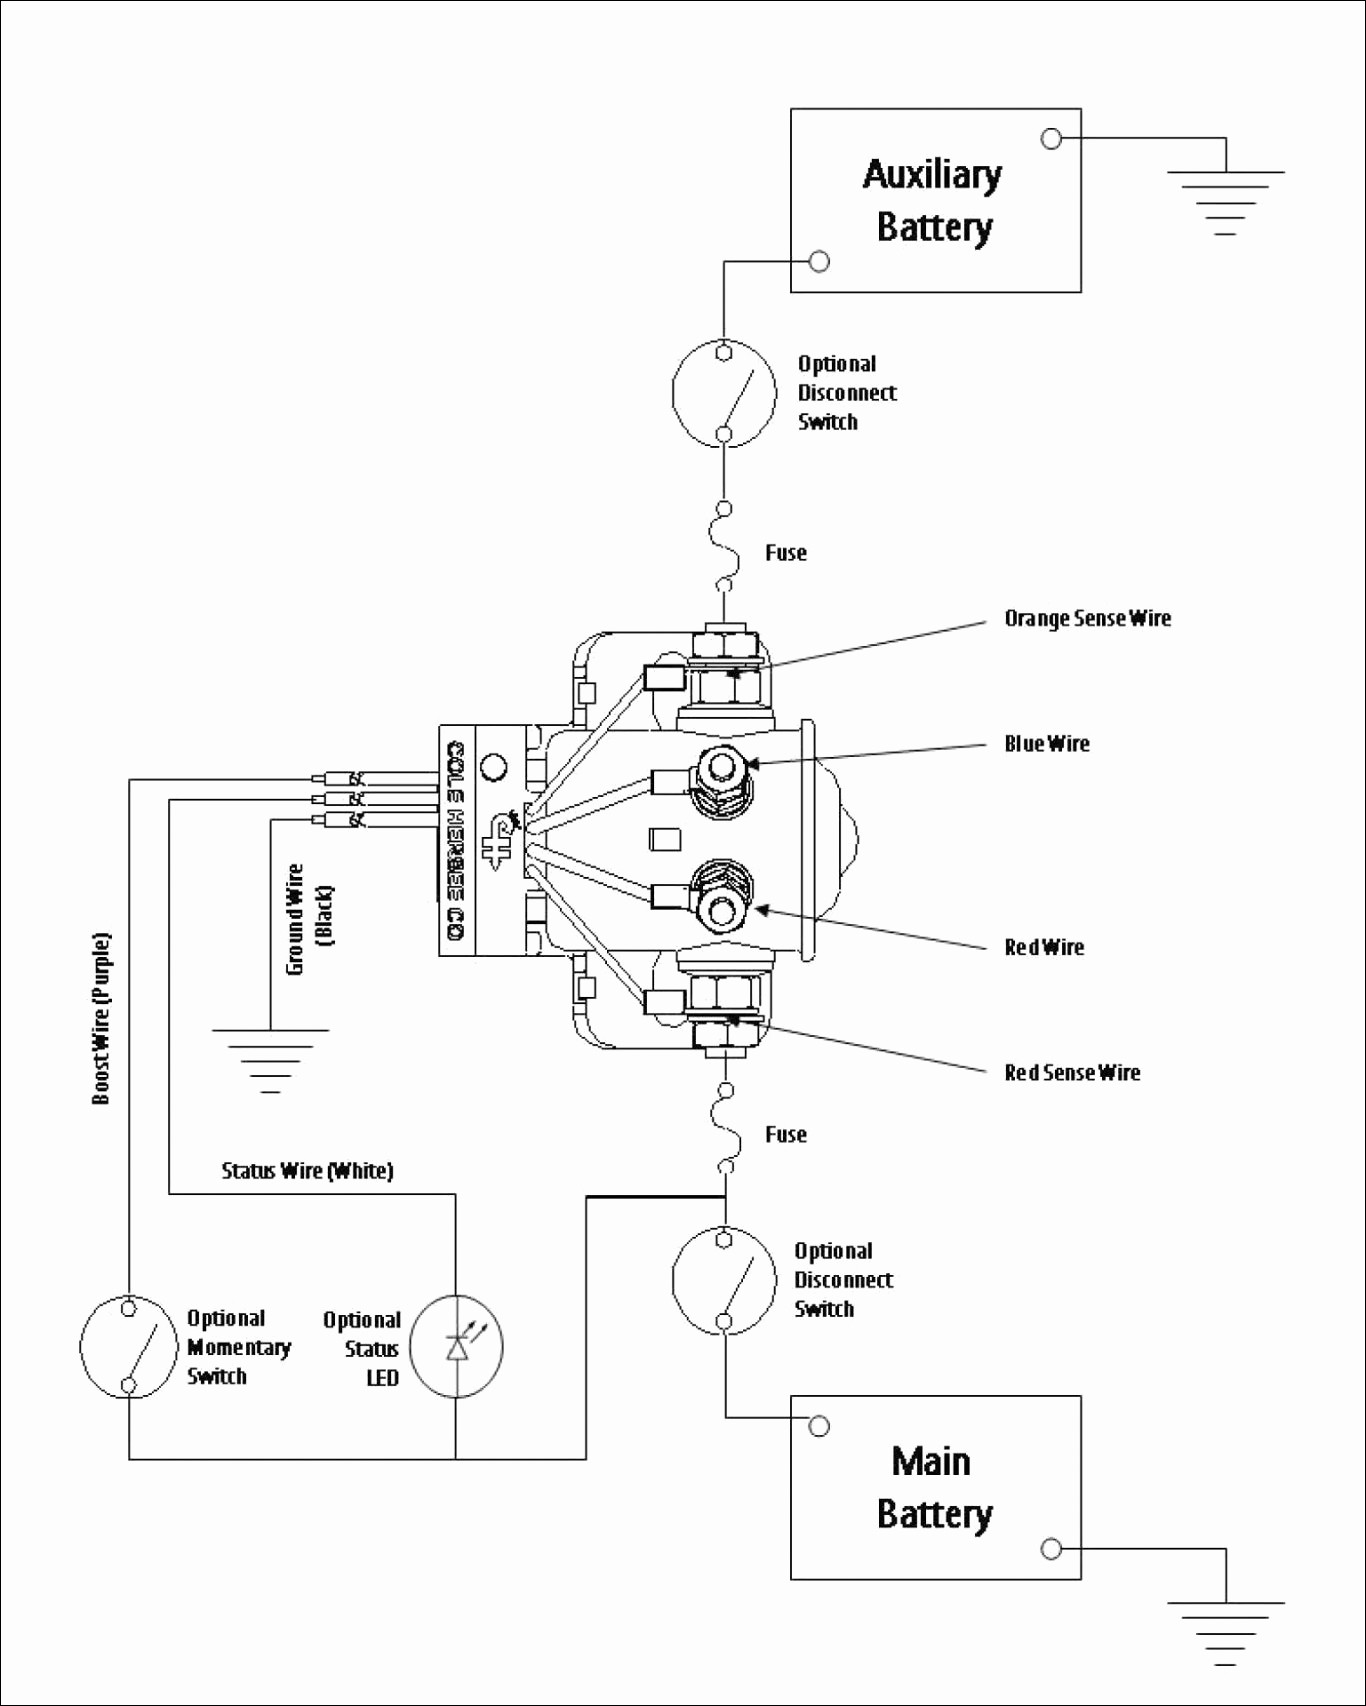 Switch Wiring Diagram Gallery – Wiring Diagram Collection